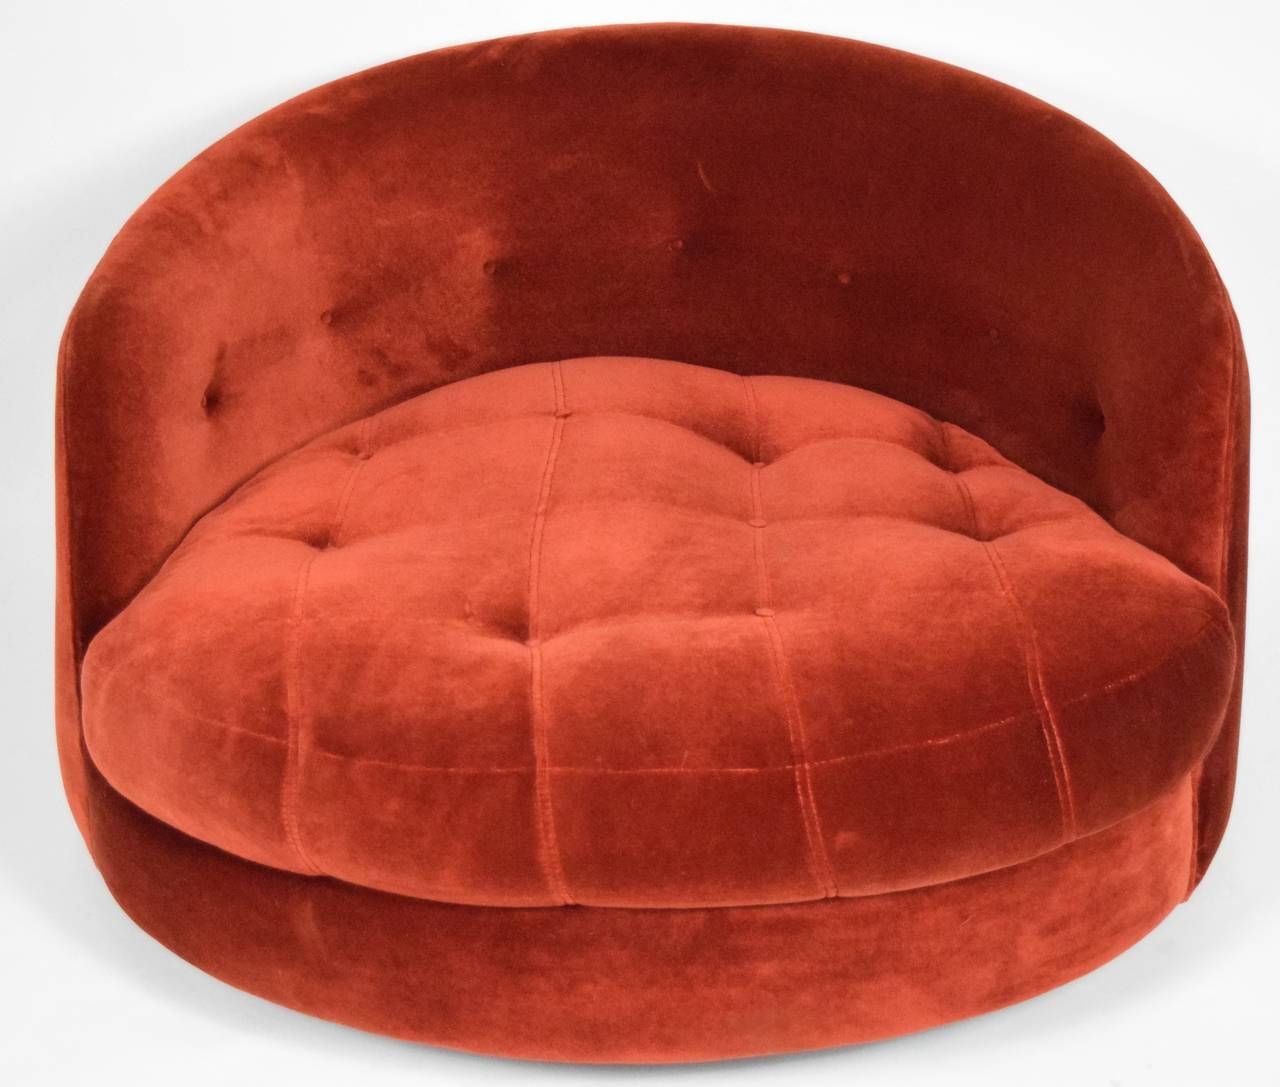 Circa 1960s Milo Baughman tub chair , has original Thayer Coggin lables intact. Red upholstery.